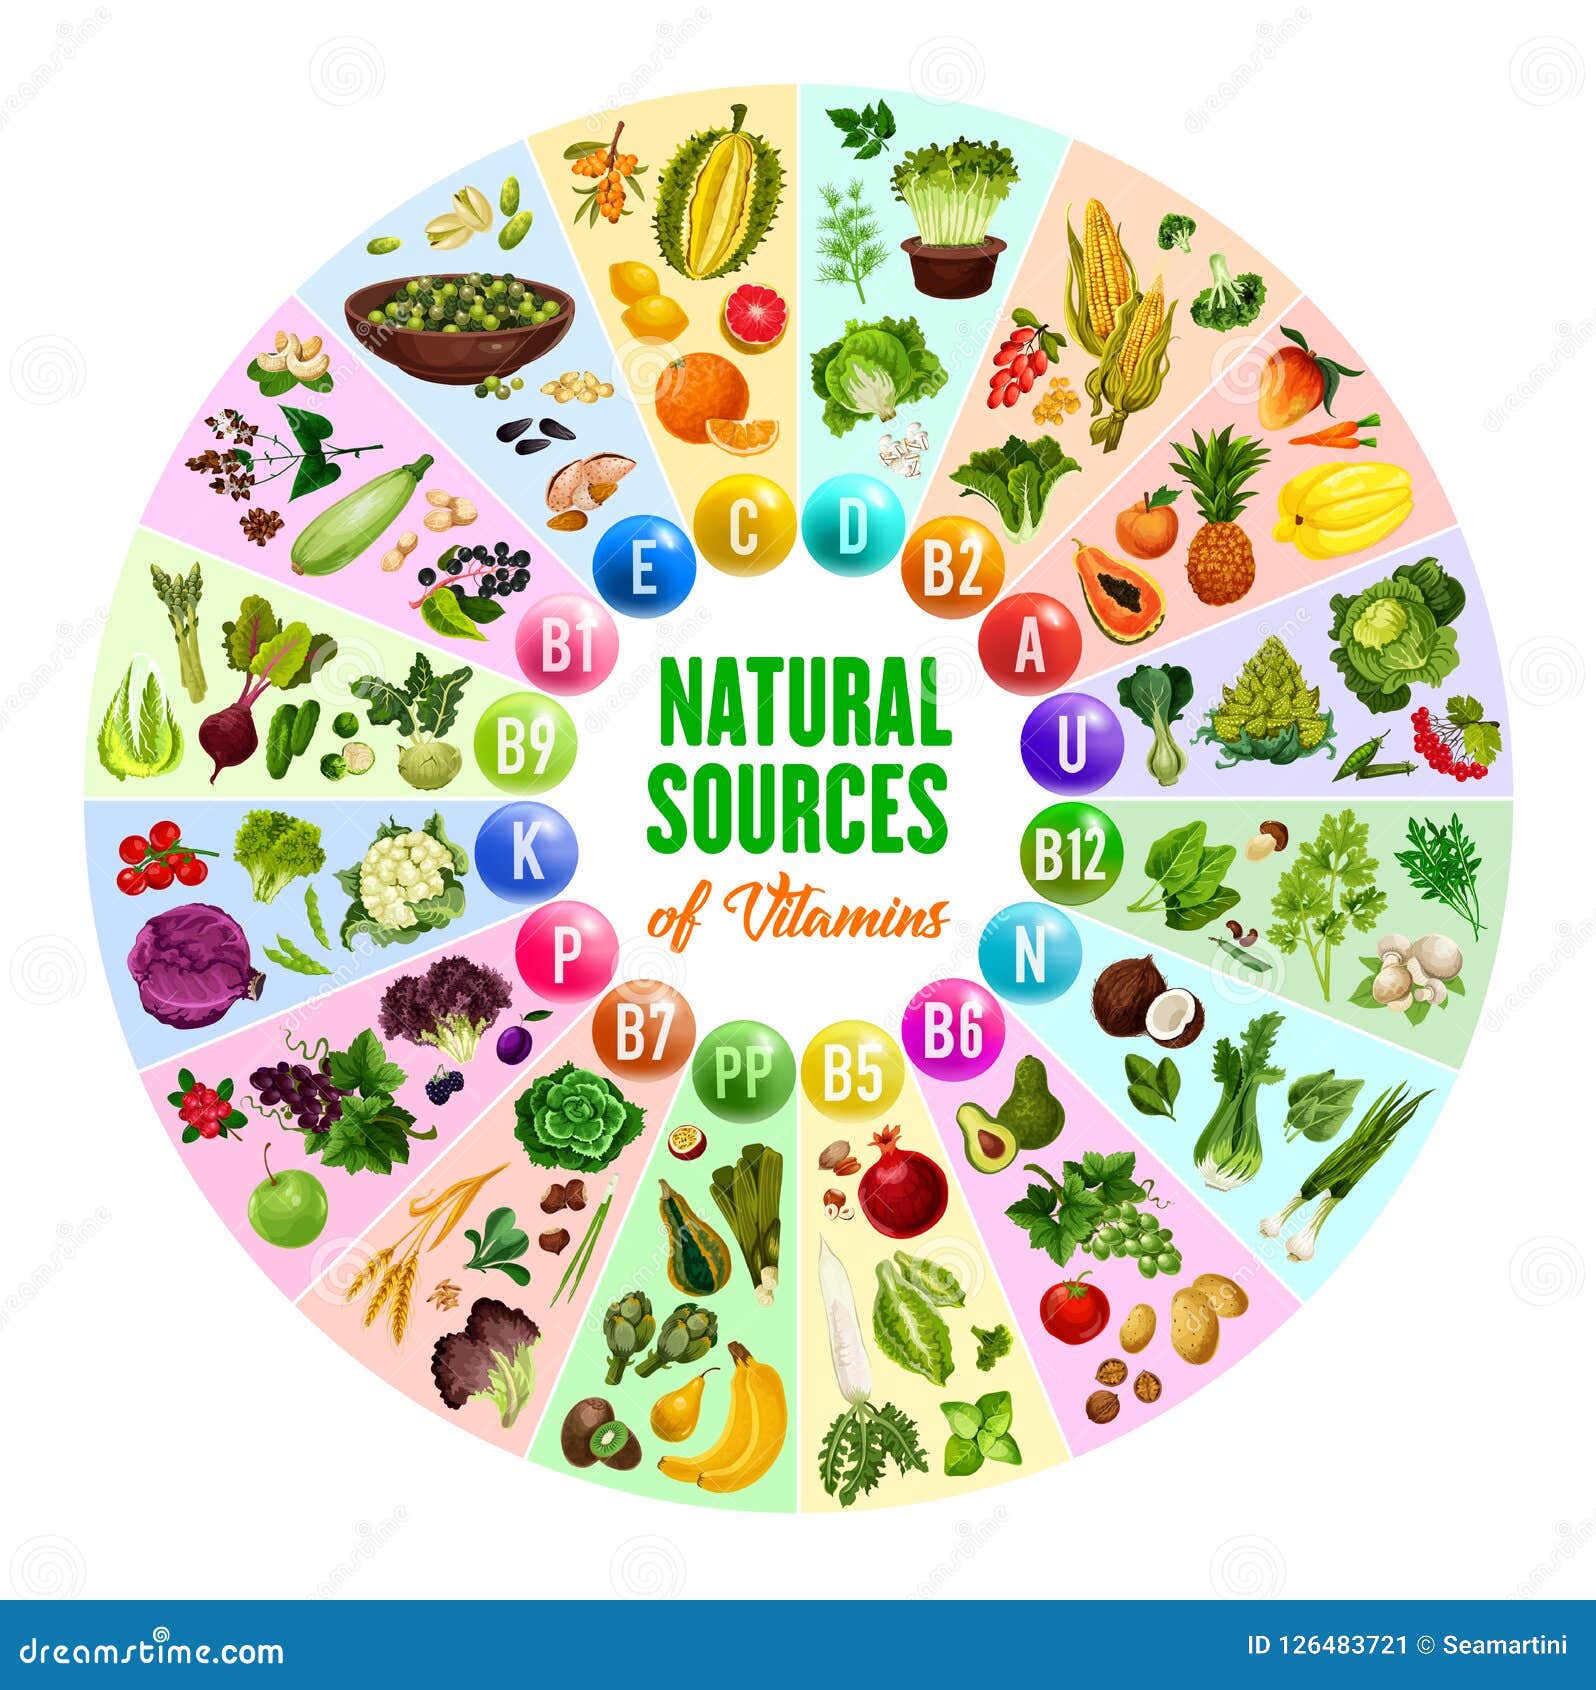 Vitamins And Food Sources Chart